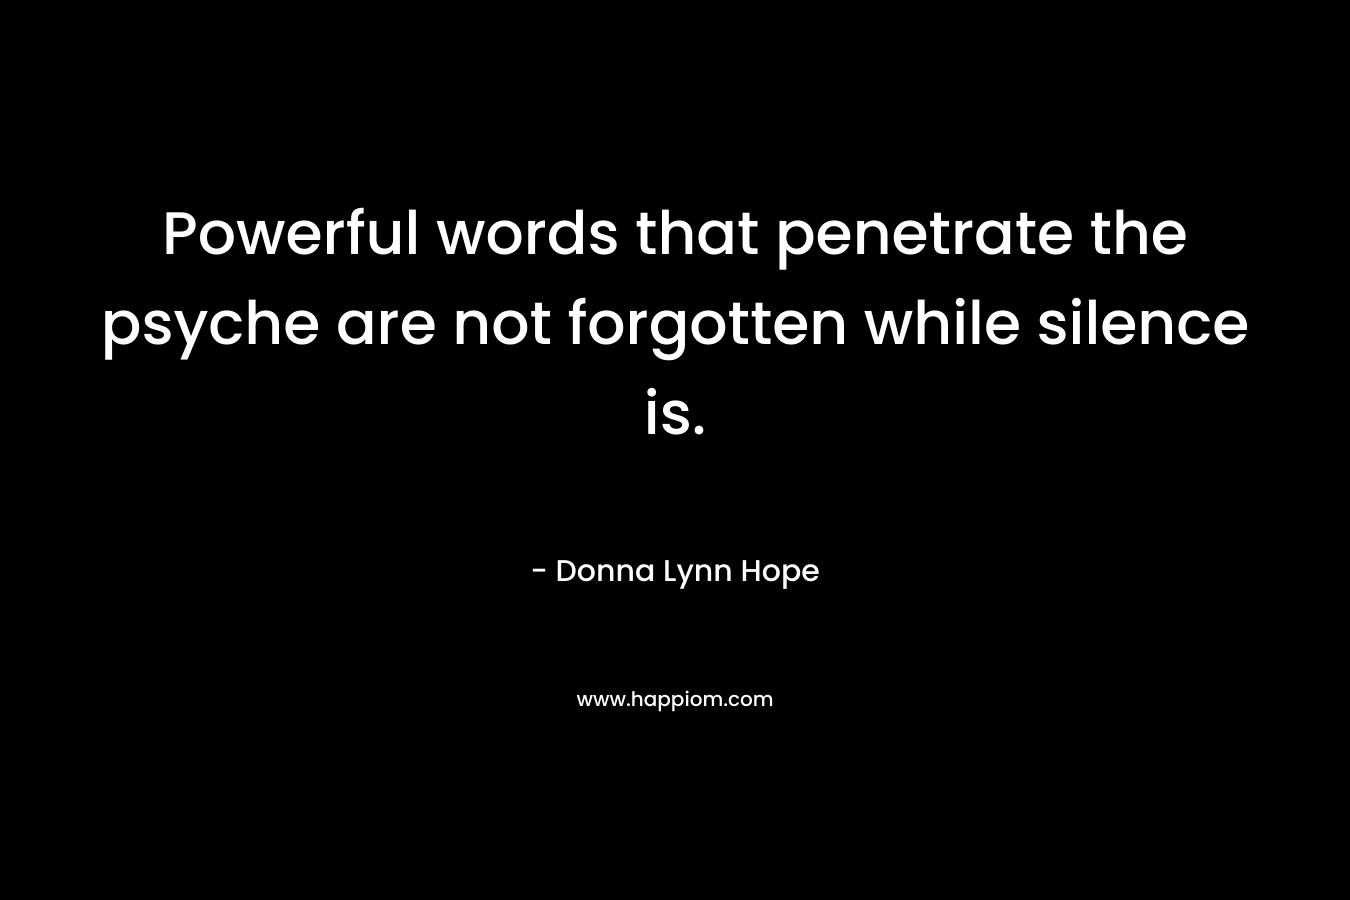 Powerful words that penetrate the psyche are not forgotten while silence is. – Donna Lynn Hope